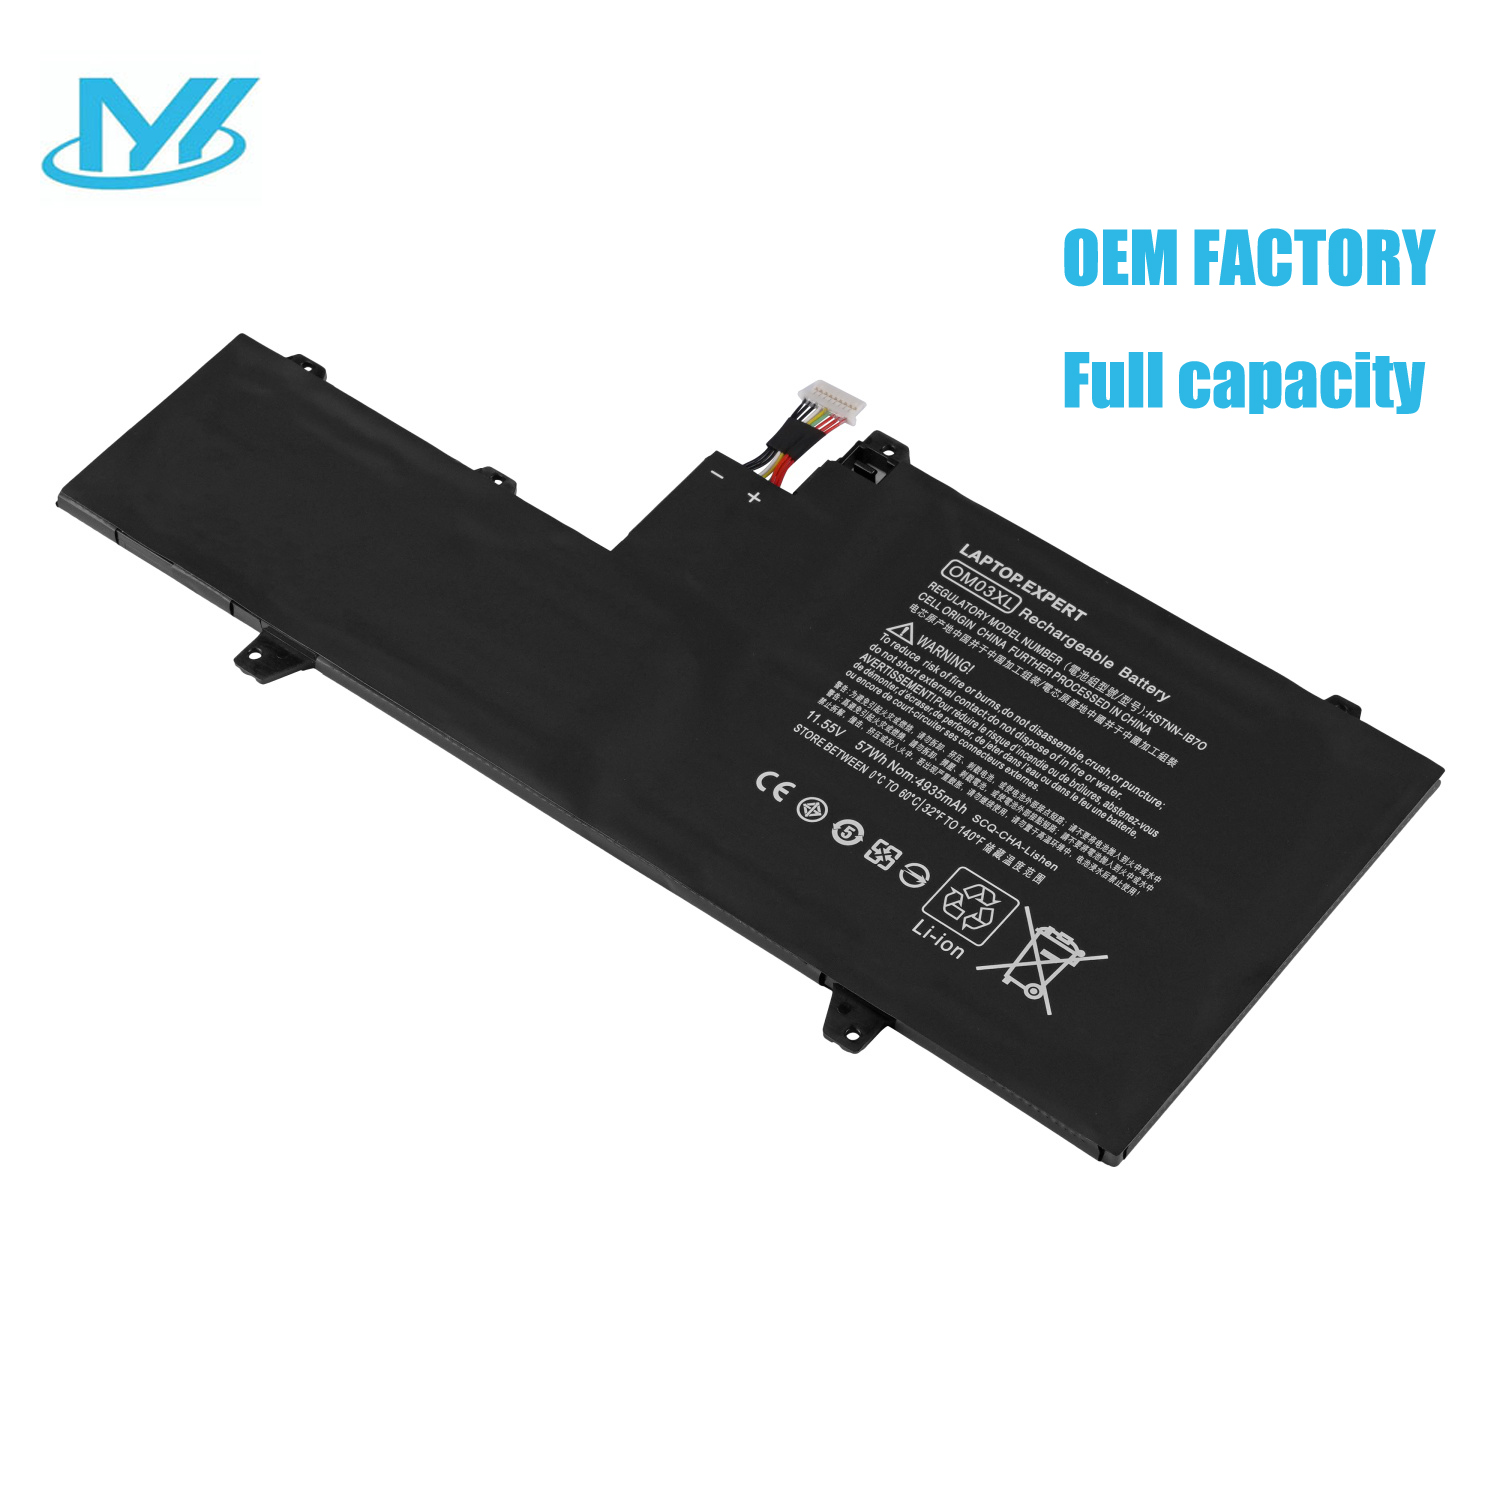 OM03XL rechargeable lithium ion Notebook battery Laptop battery for HP EliteBook x360 1030 G2 series part number OM03 HSTNN-IB7O notebook 11.55v 3800mAh 